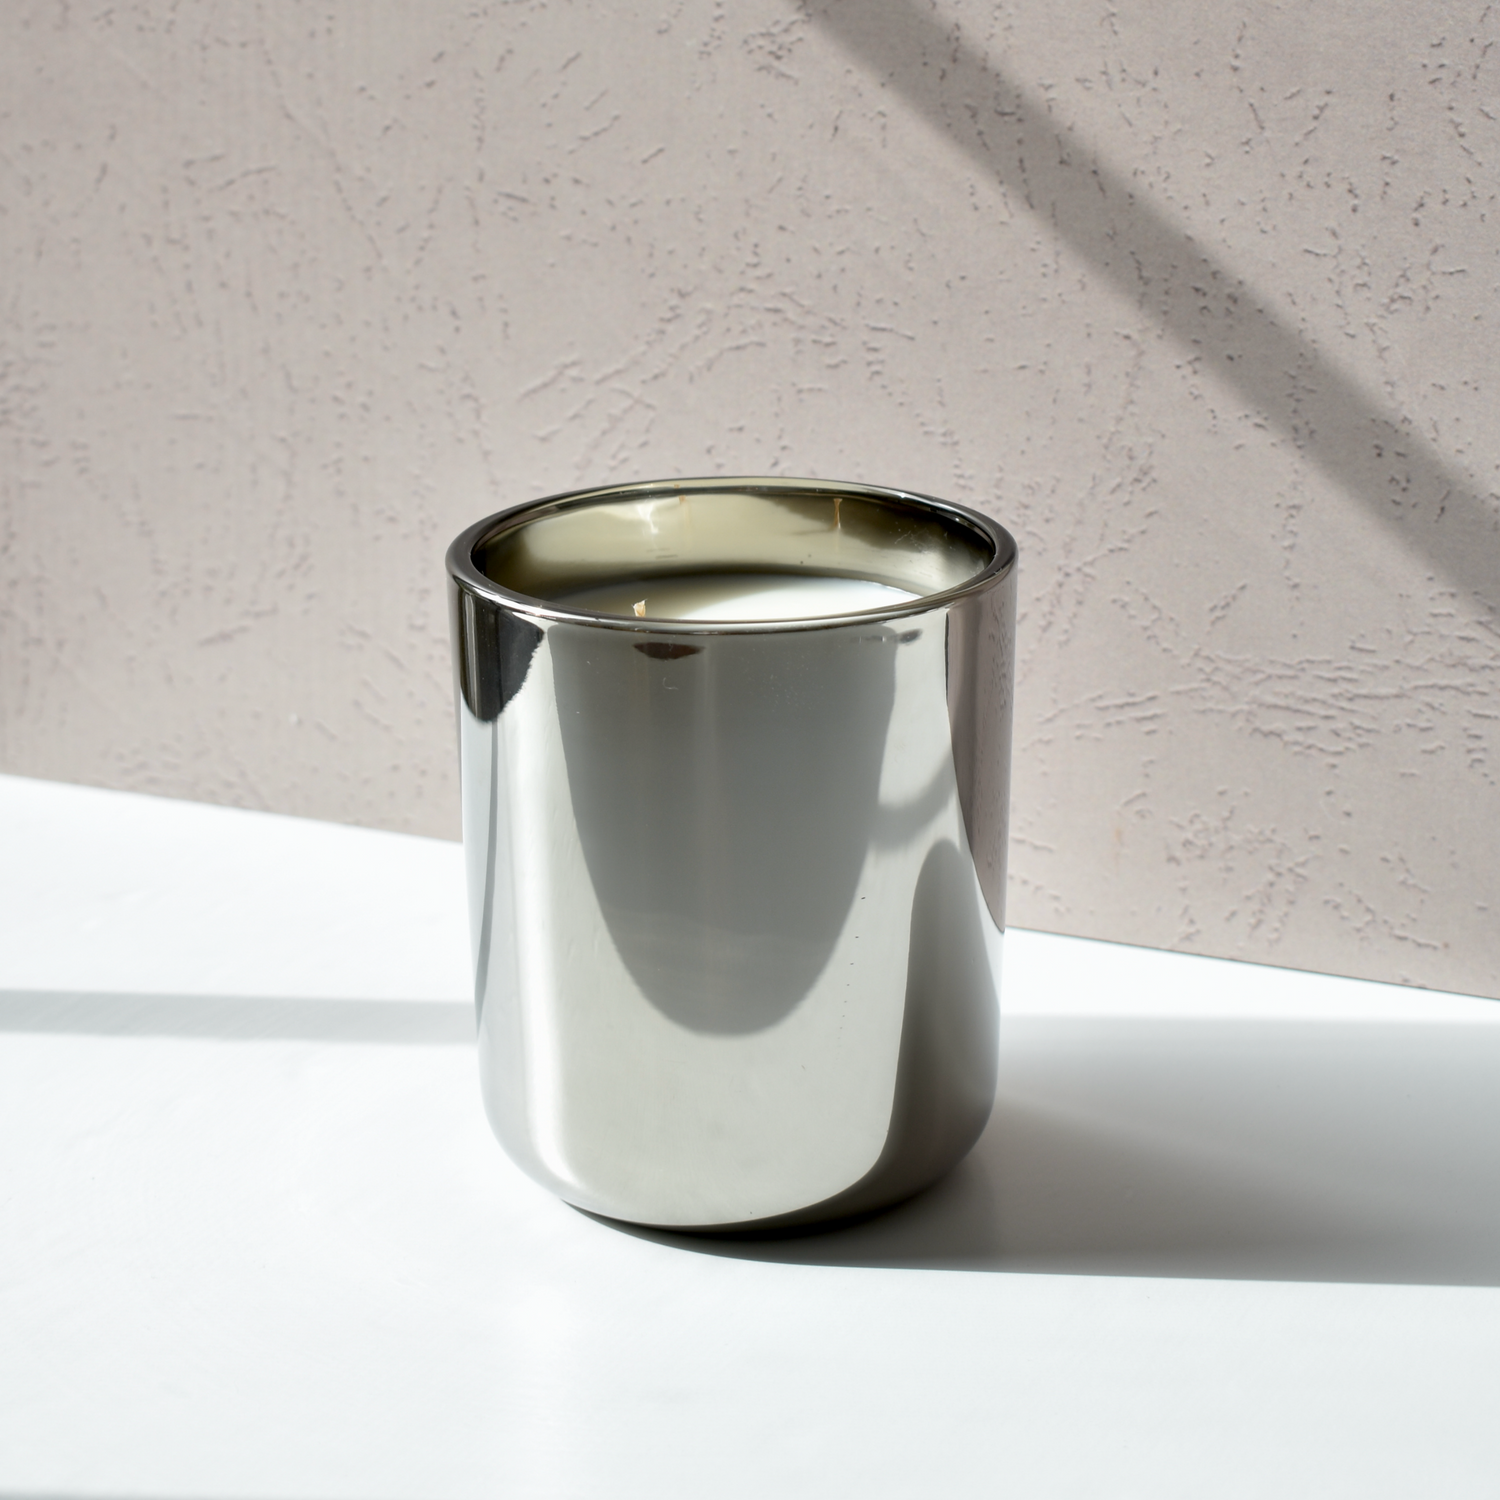 metallic gunmetal candle vessel infused with a spicy vanilla and tobacco fragrance